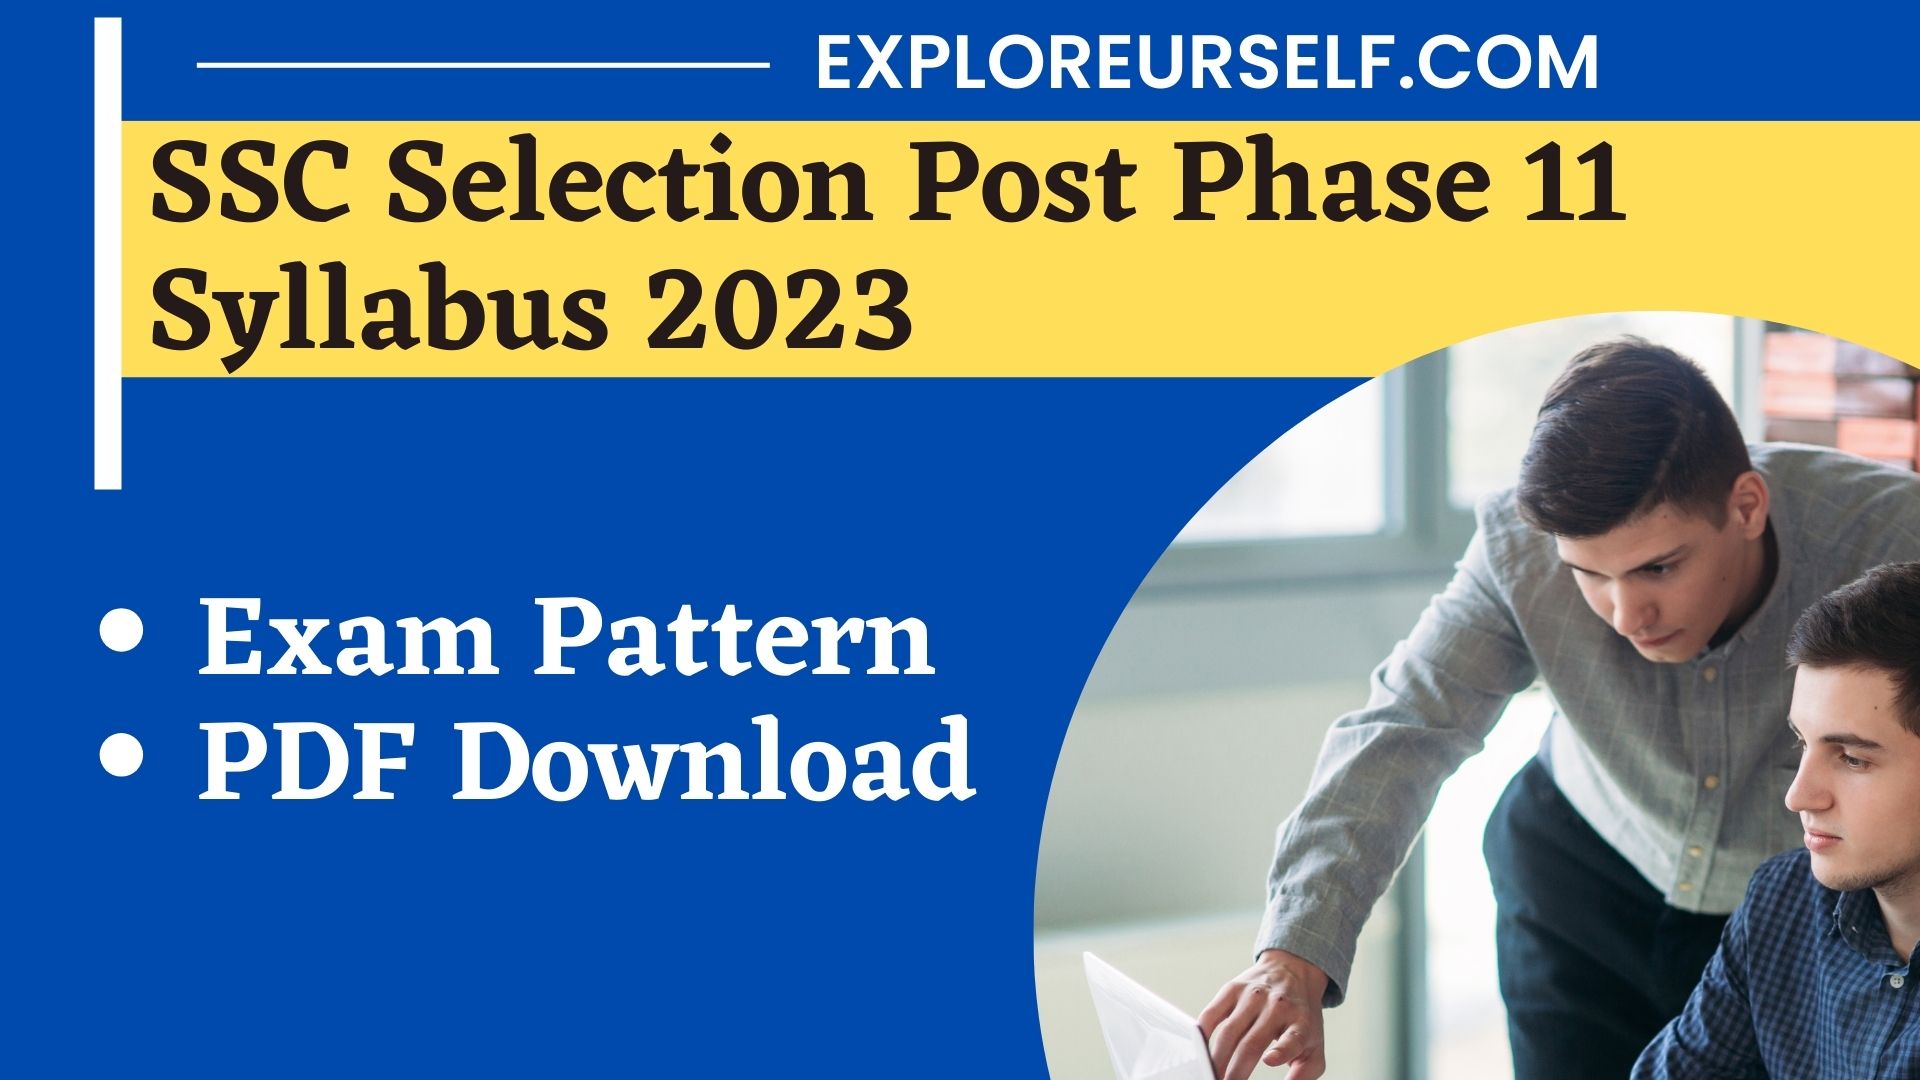 Ssc Selection Post Phase 11 Syllabus 2023 Detailed Exam Pattern 7551